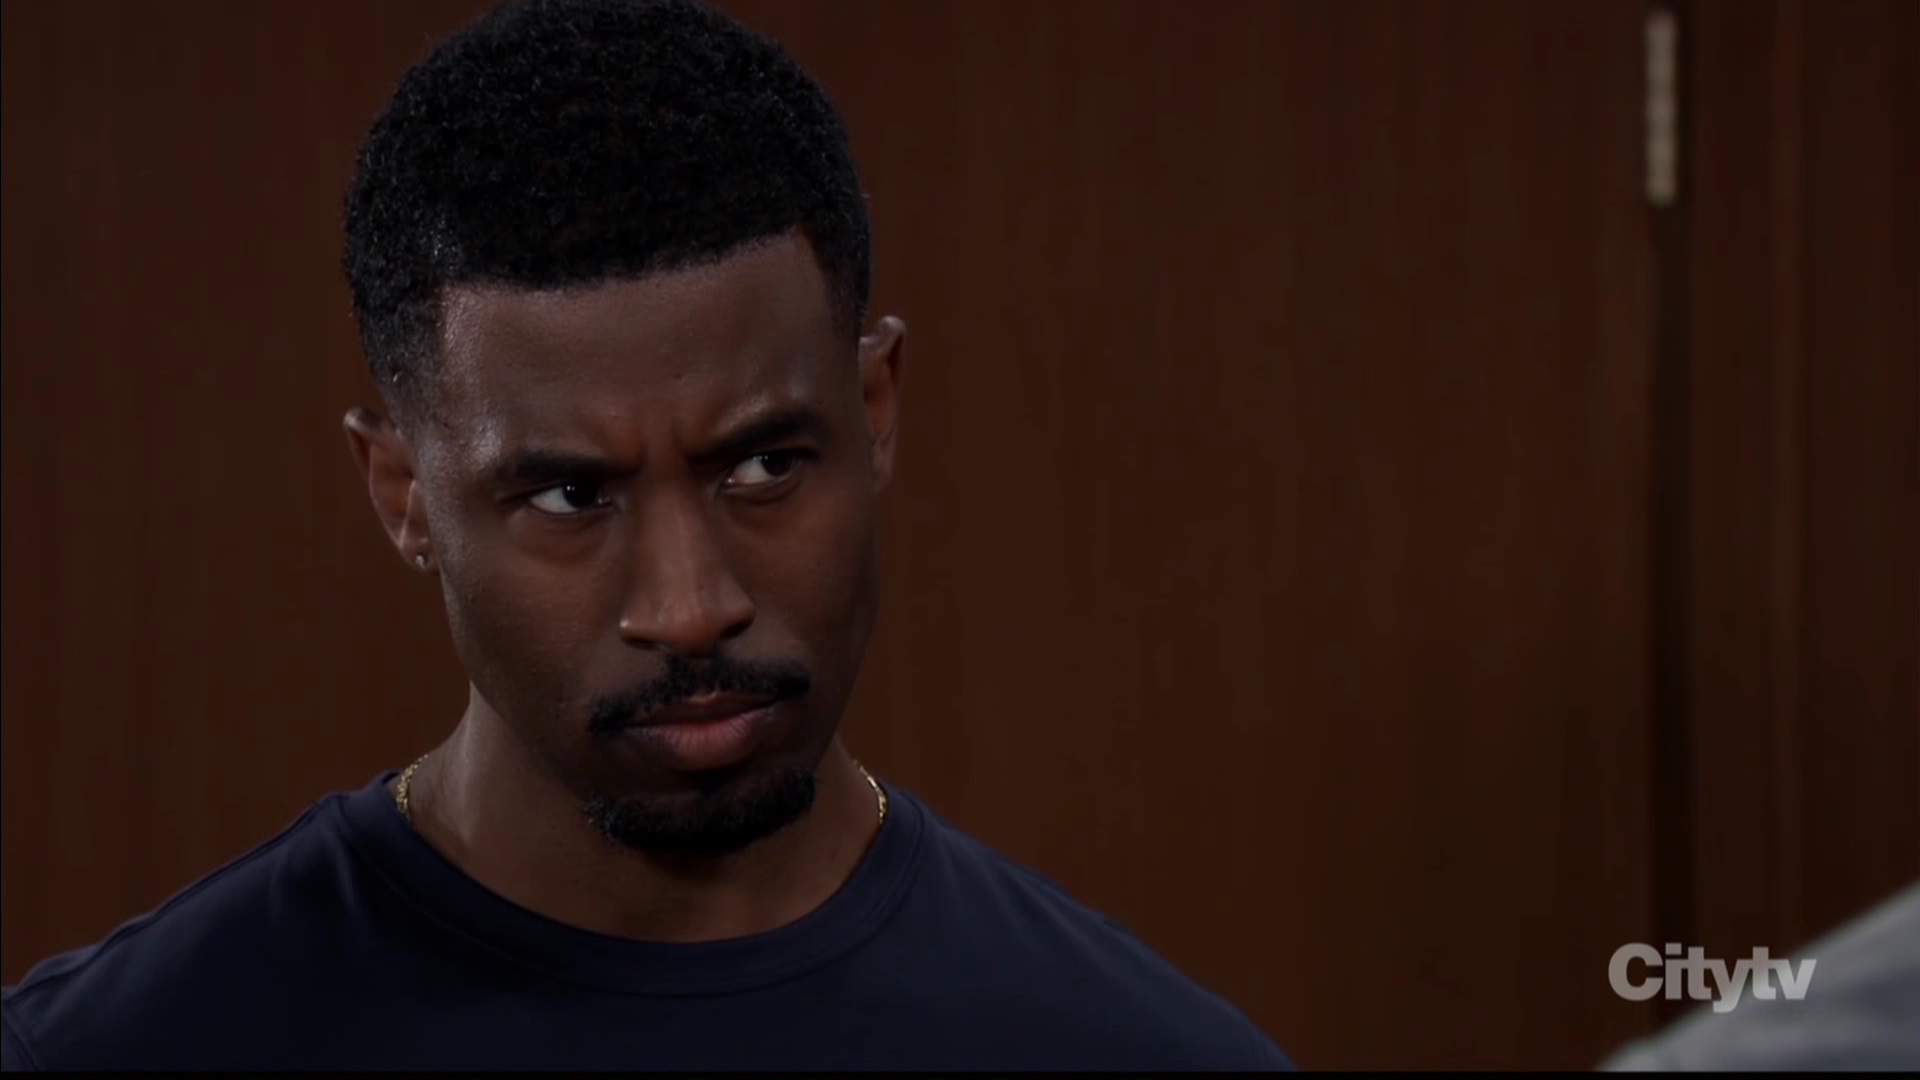 Zeke handsome and looking upset at Curtis for telling the truth